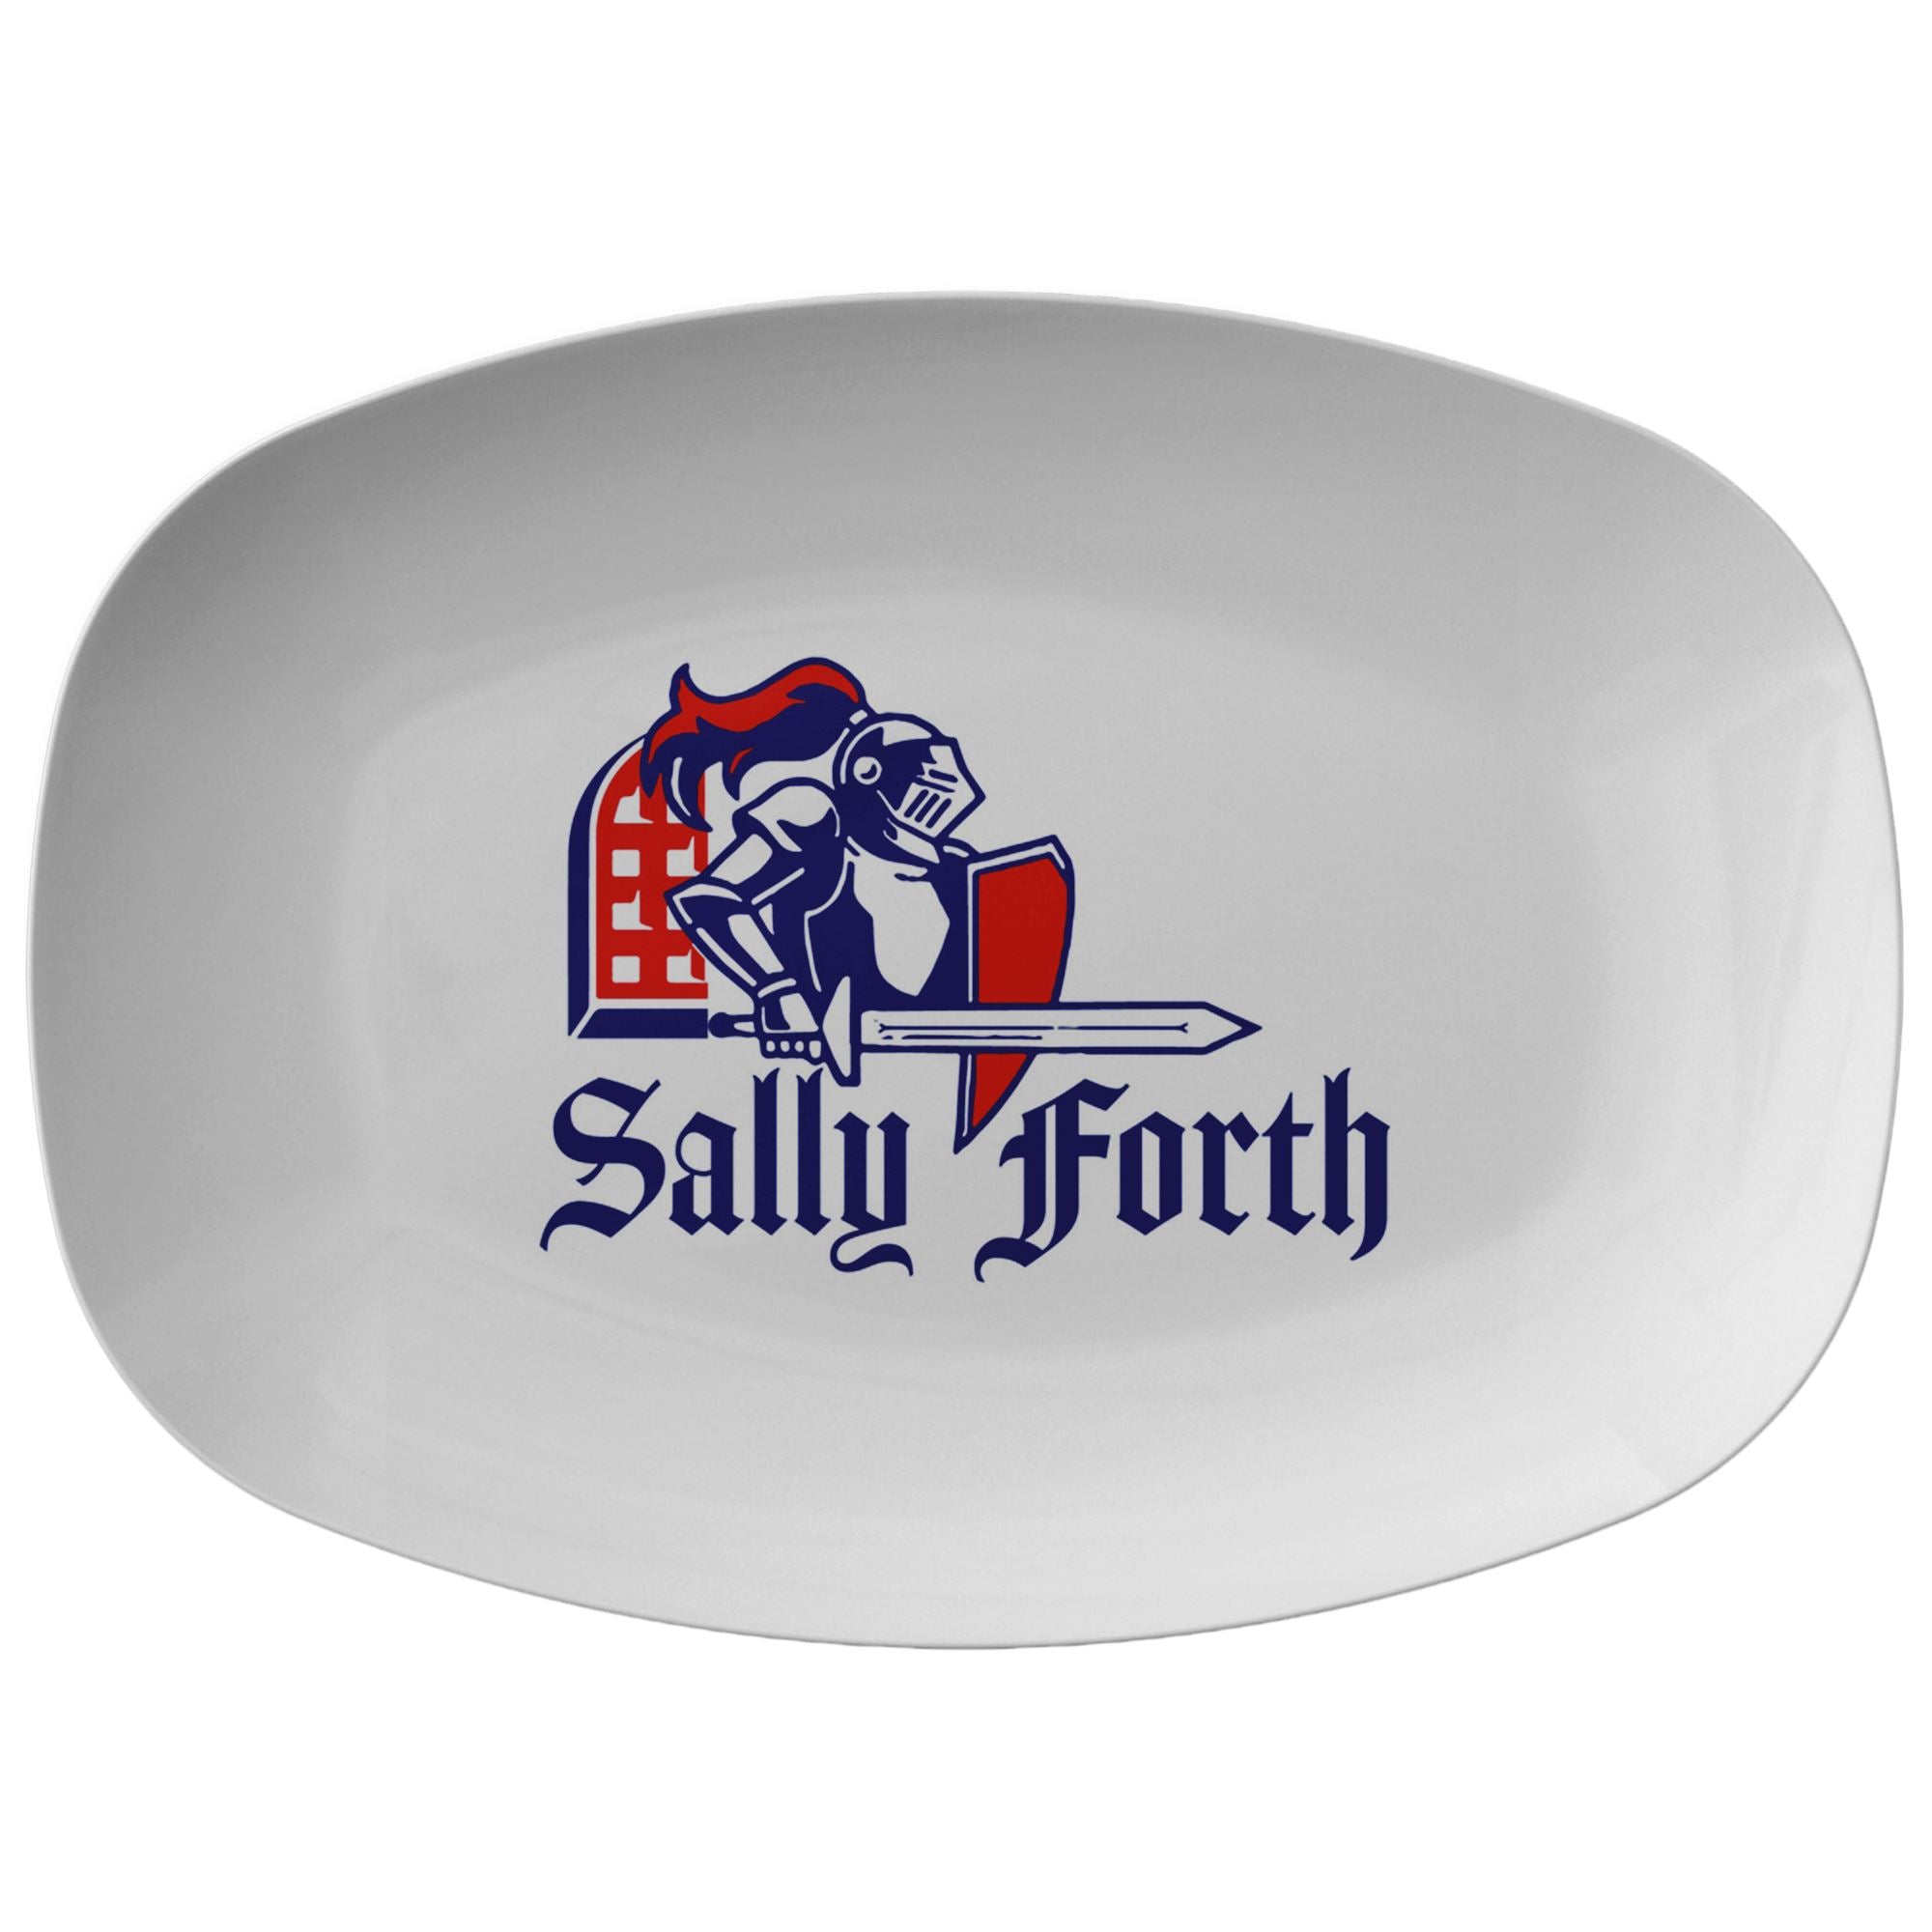 Sally Froth Platter - Houseboat Kings